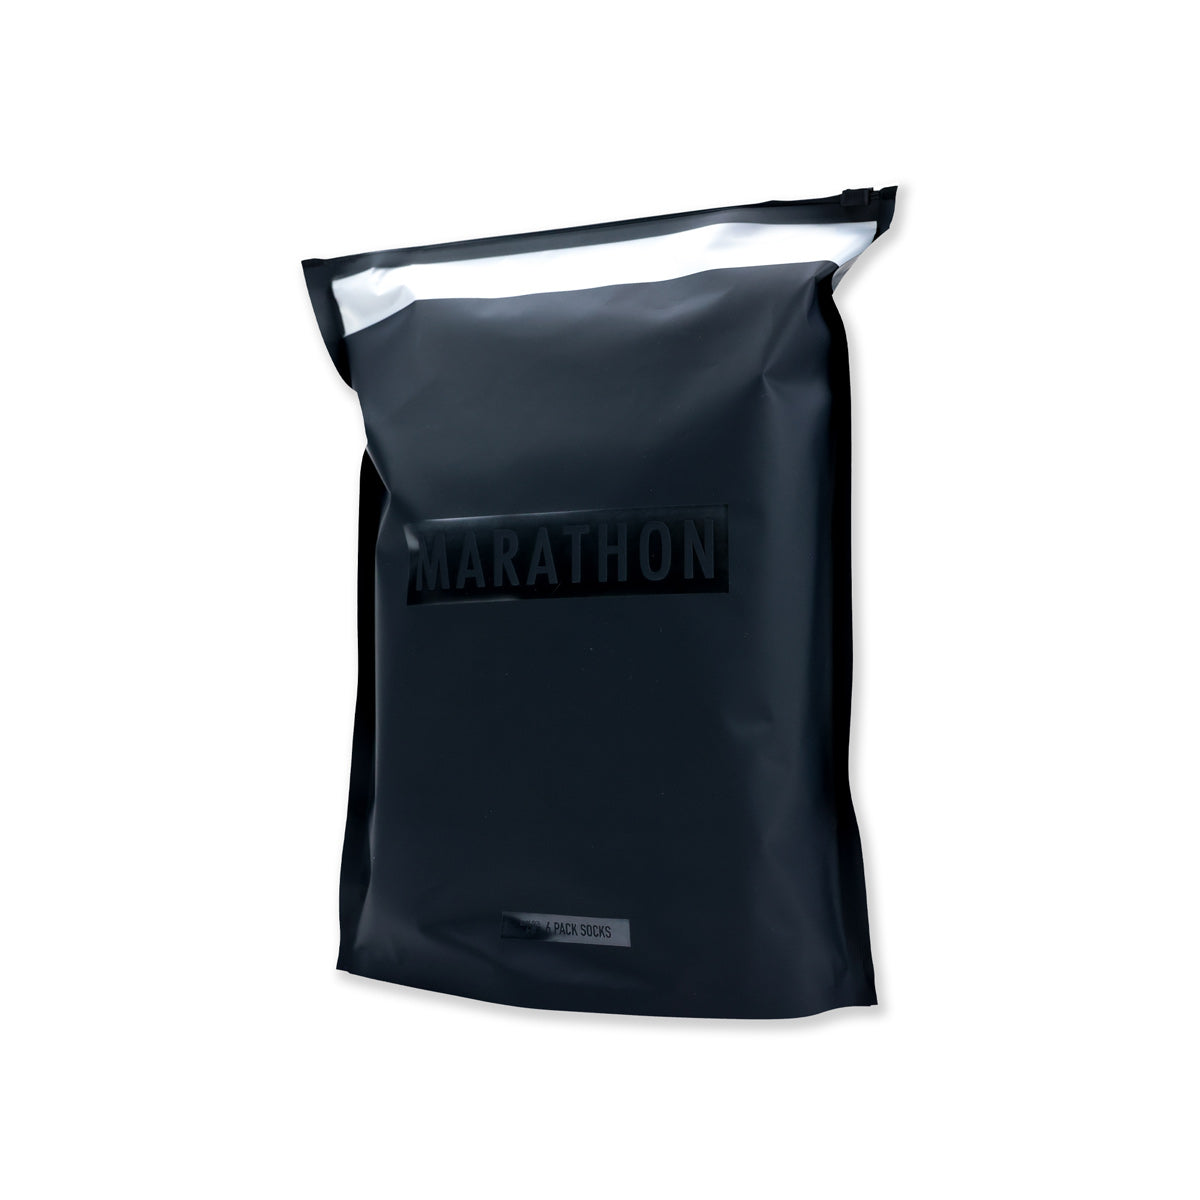 The Marathon Clothing Socks - 6 Pack - Packaging - Front